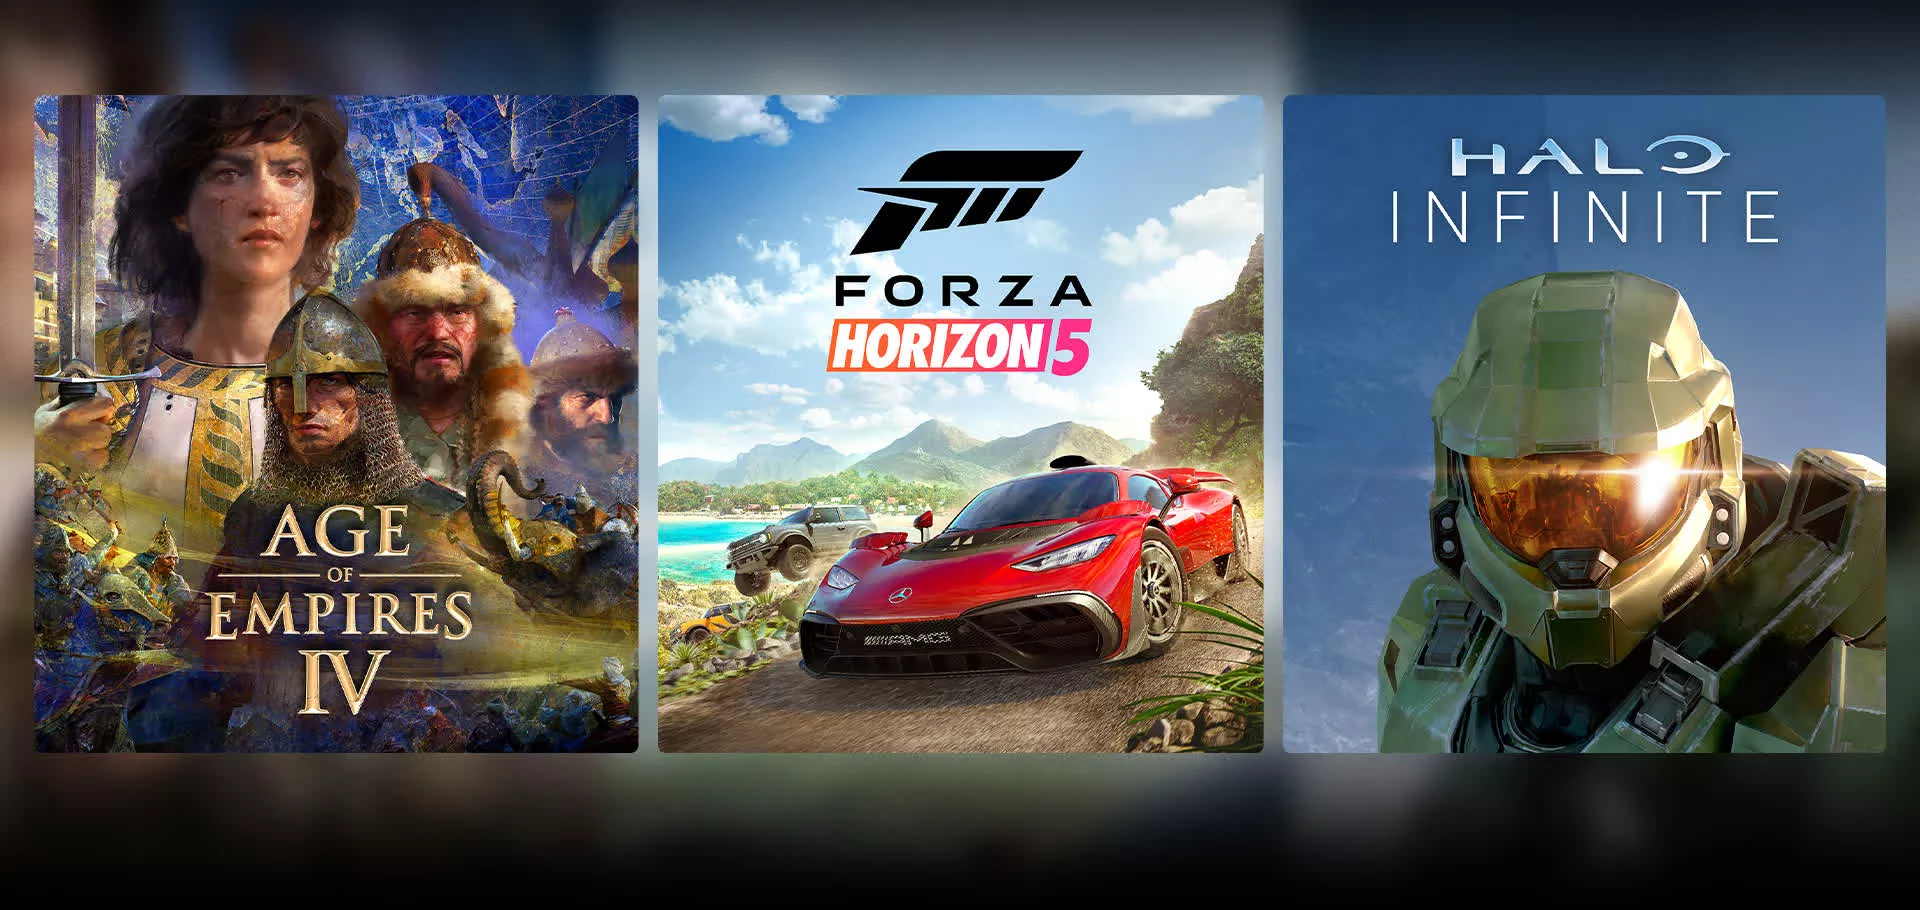 Microsoft offers 3 months of free PC Game Pass to people who played Halo Infinite, Forza Horizon 5, or Age of Empires 4